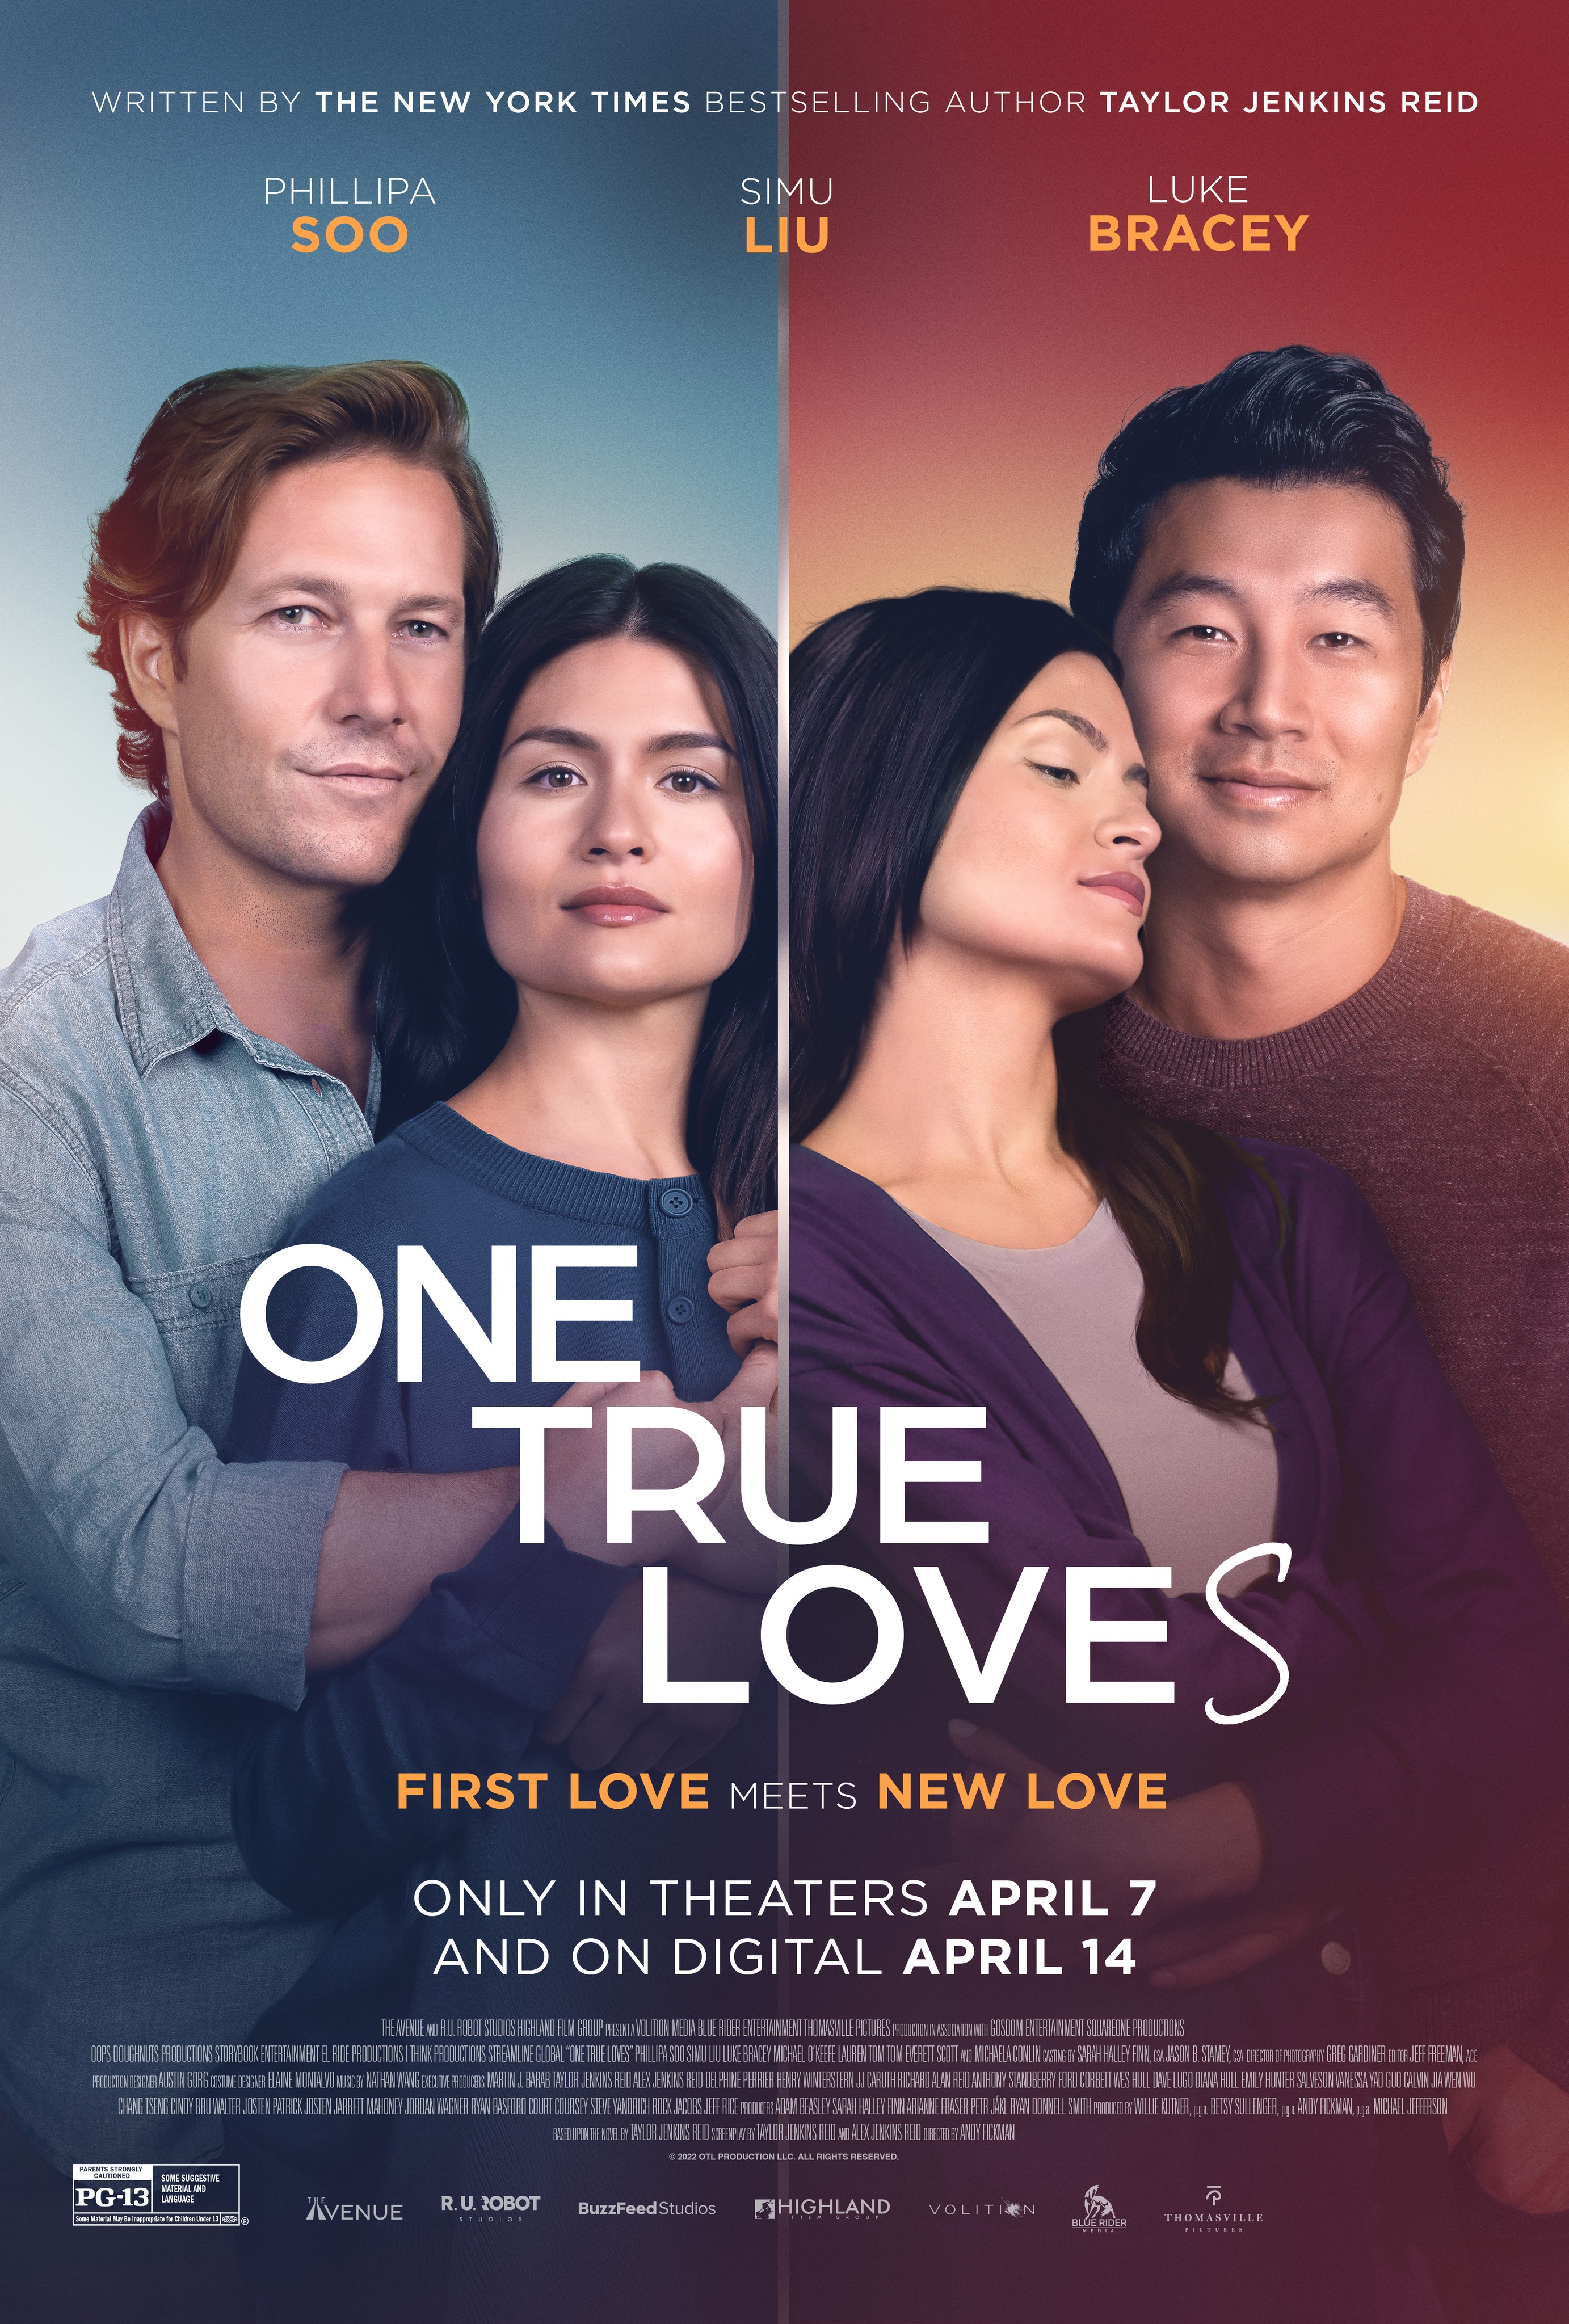 Love Is All You Need? - Rotten Tomatoes